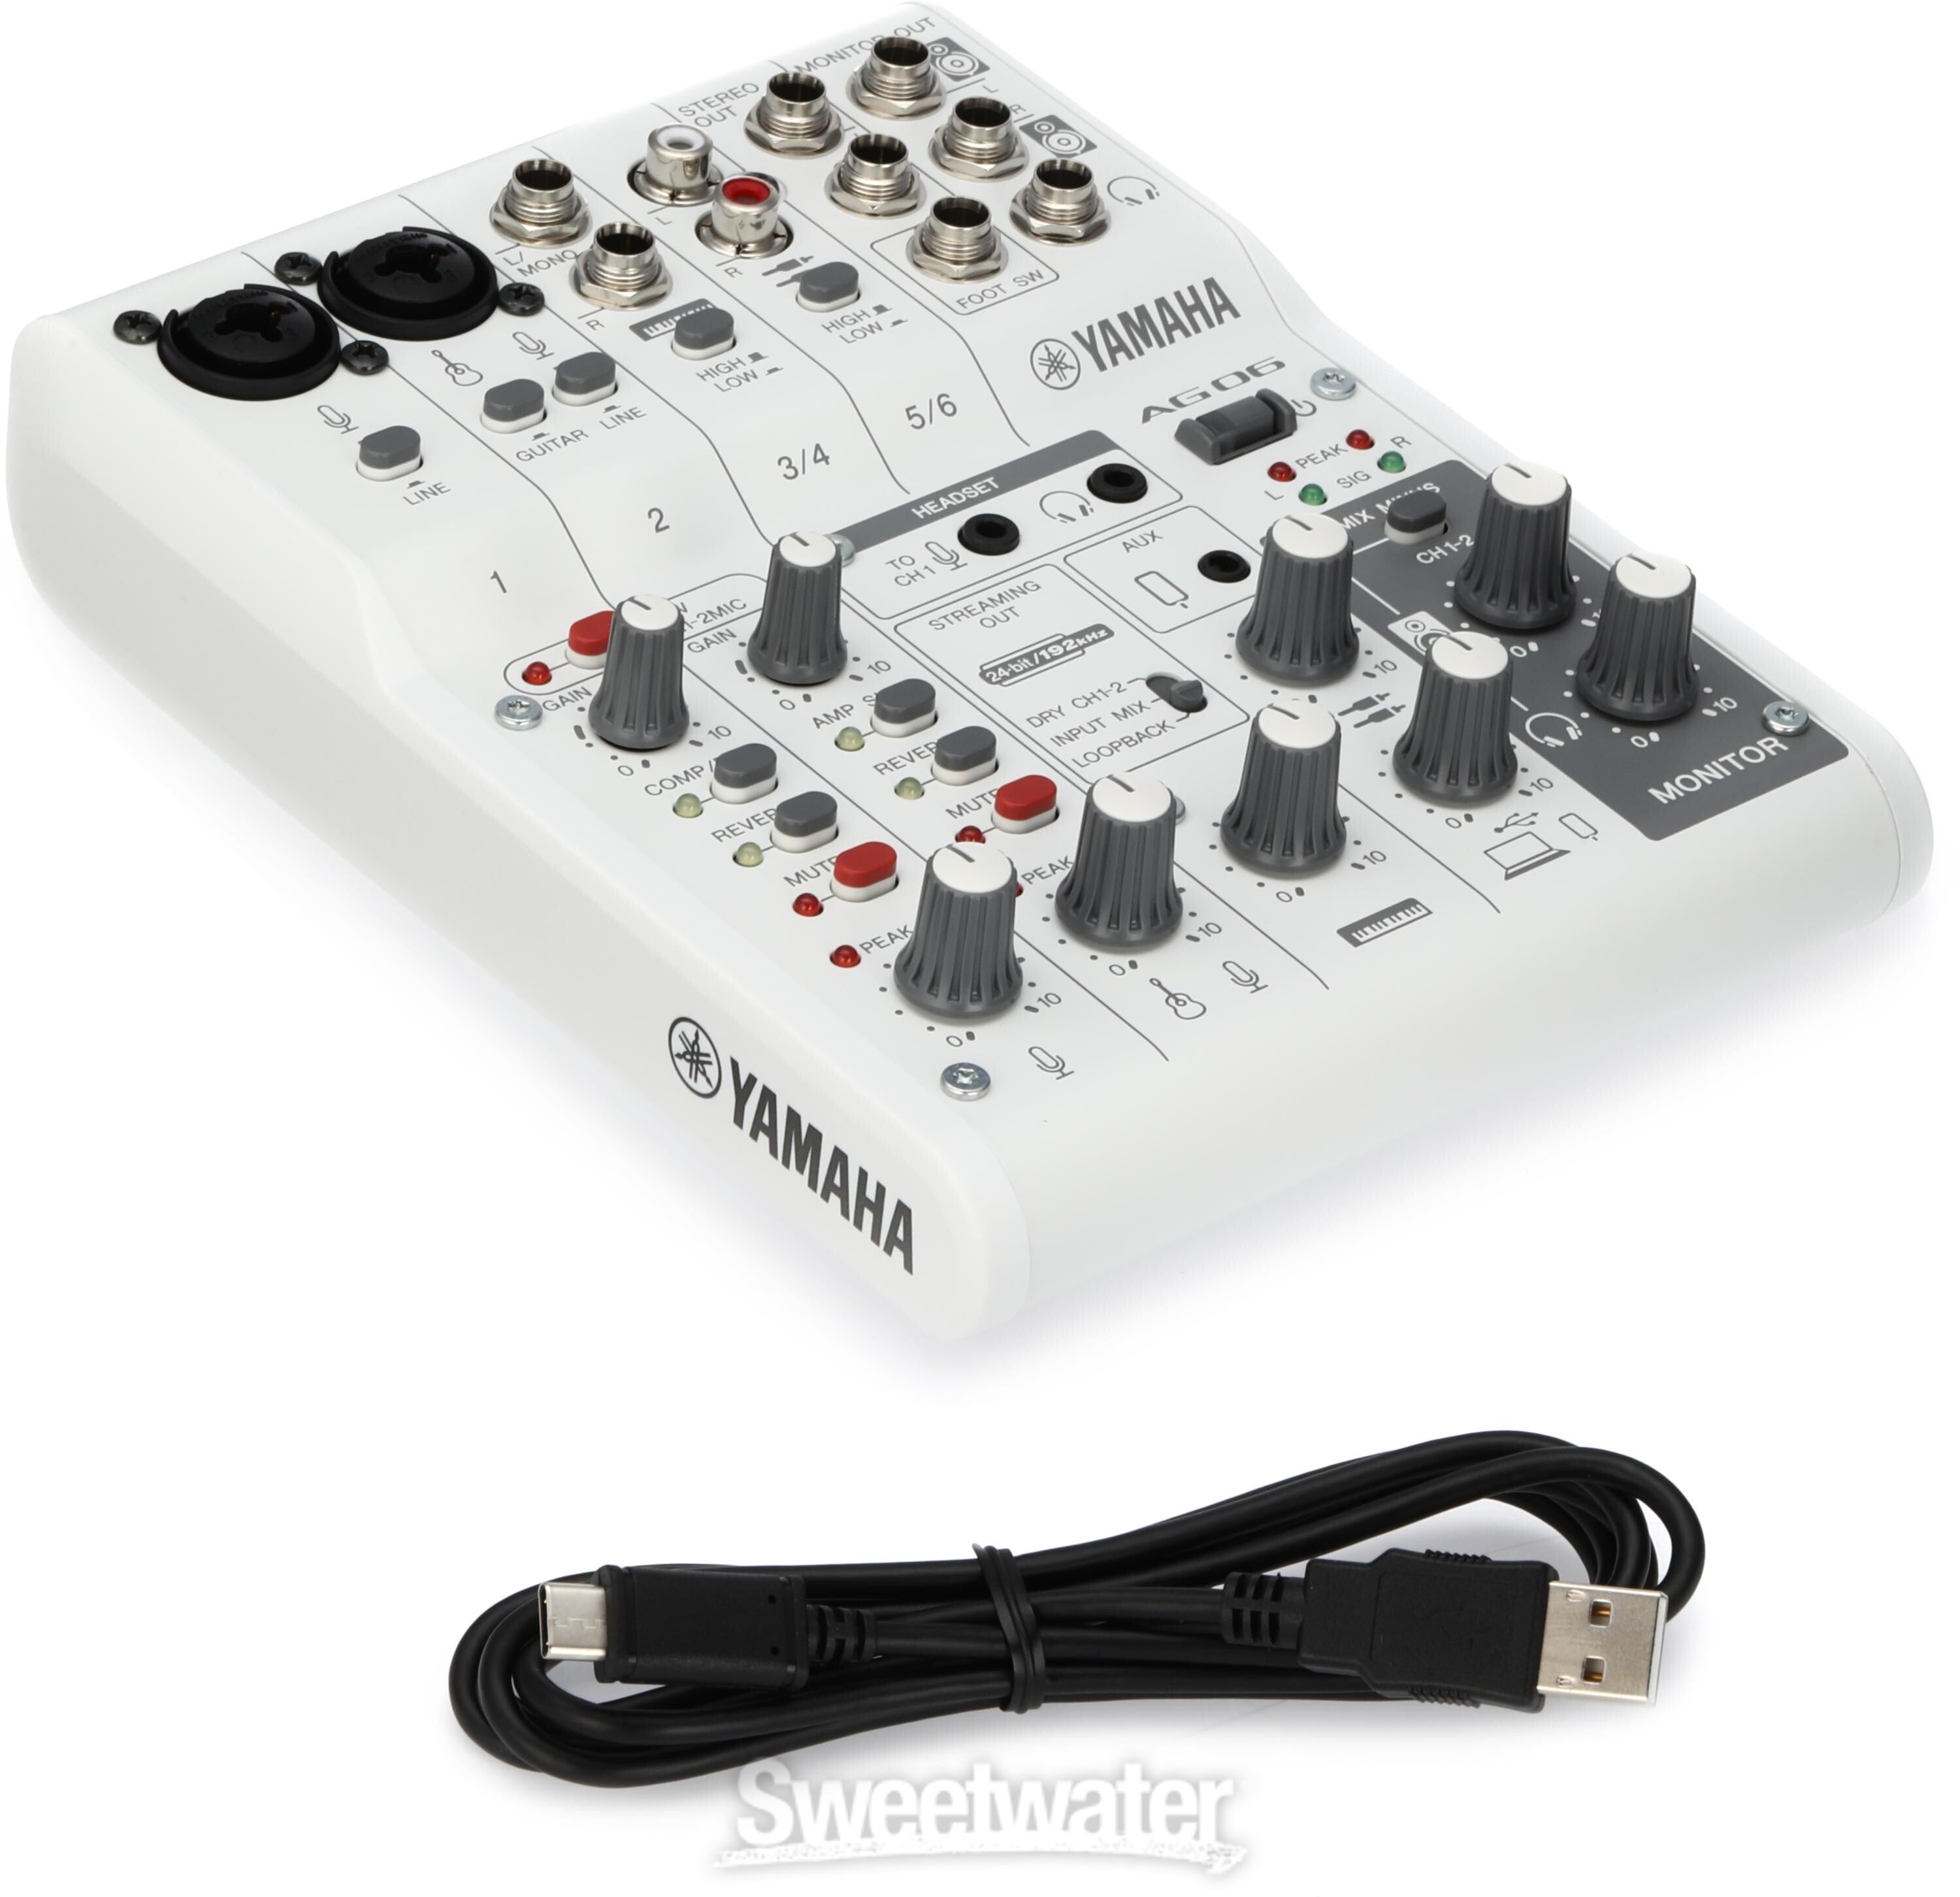 AG06 Mk2 6-channel Mixer and USB Audio Interface - White - Sweetwater